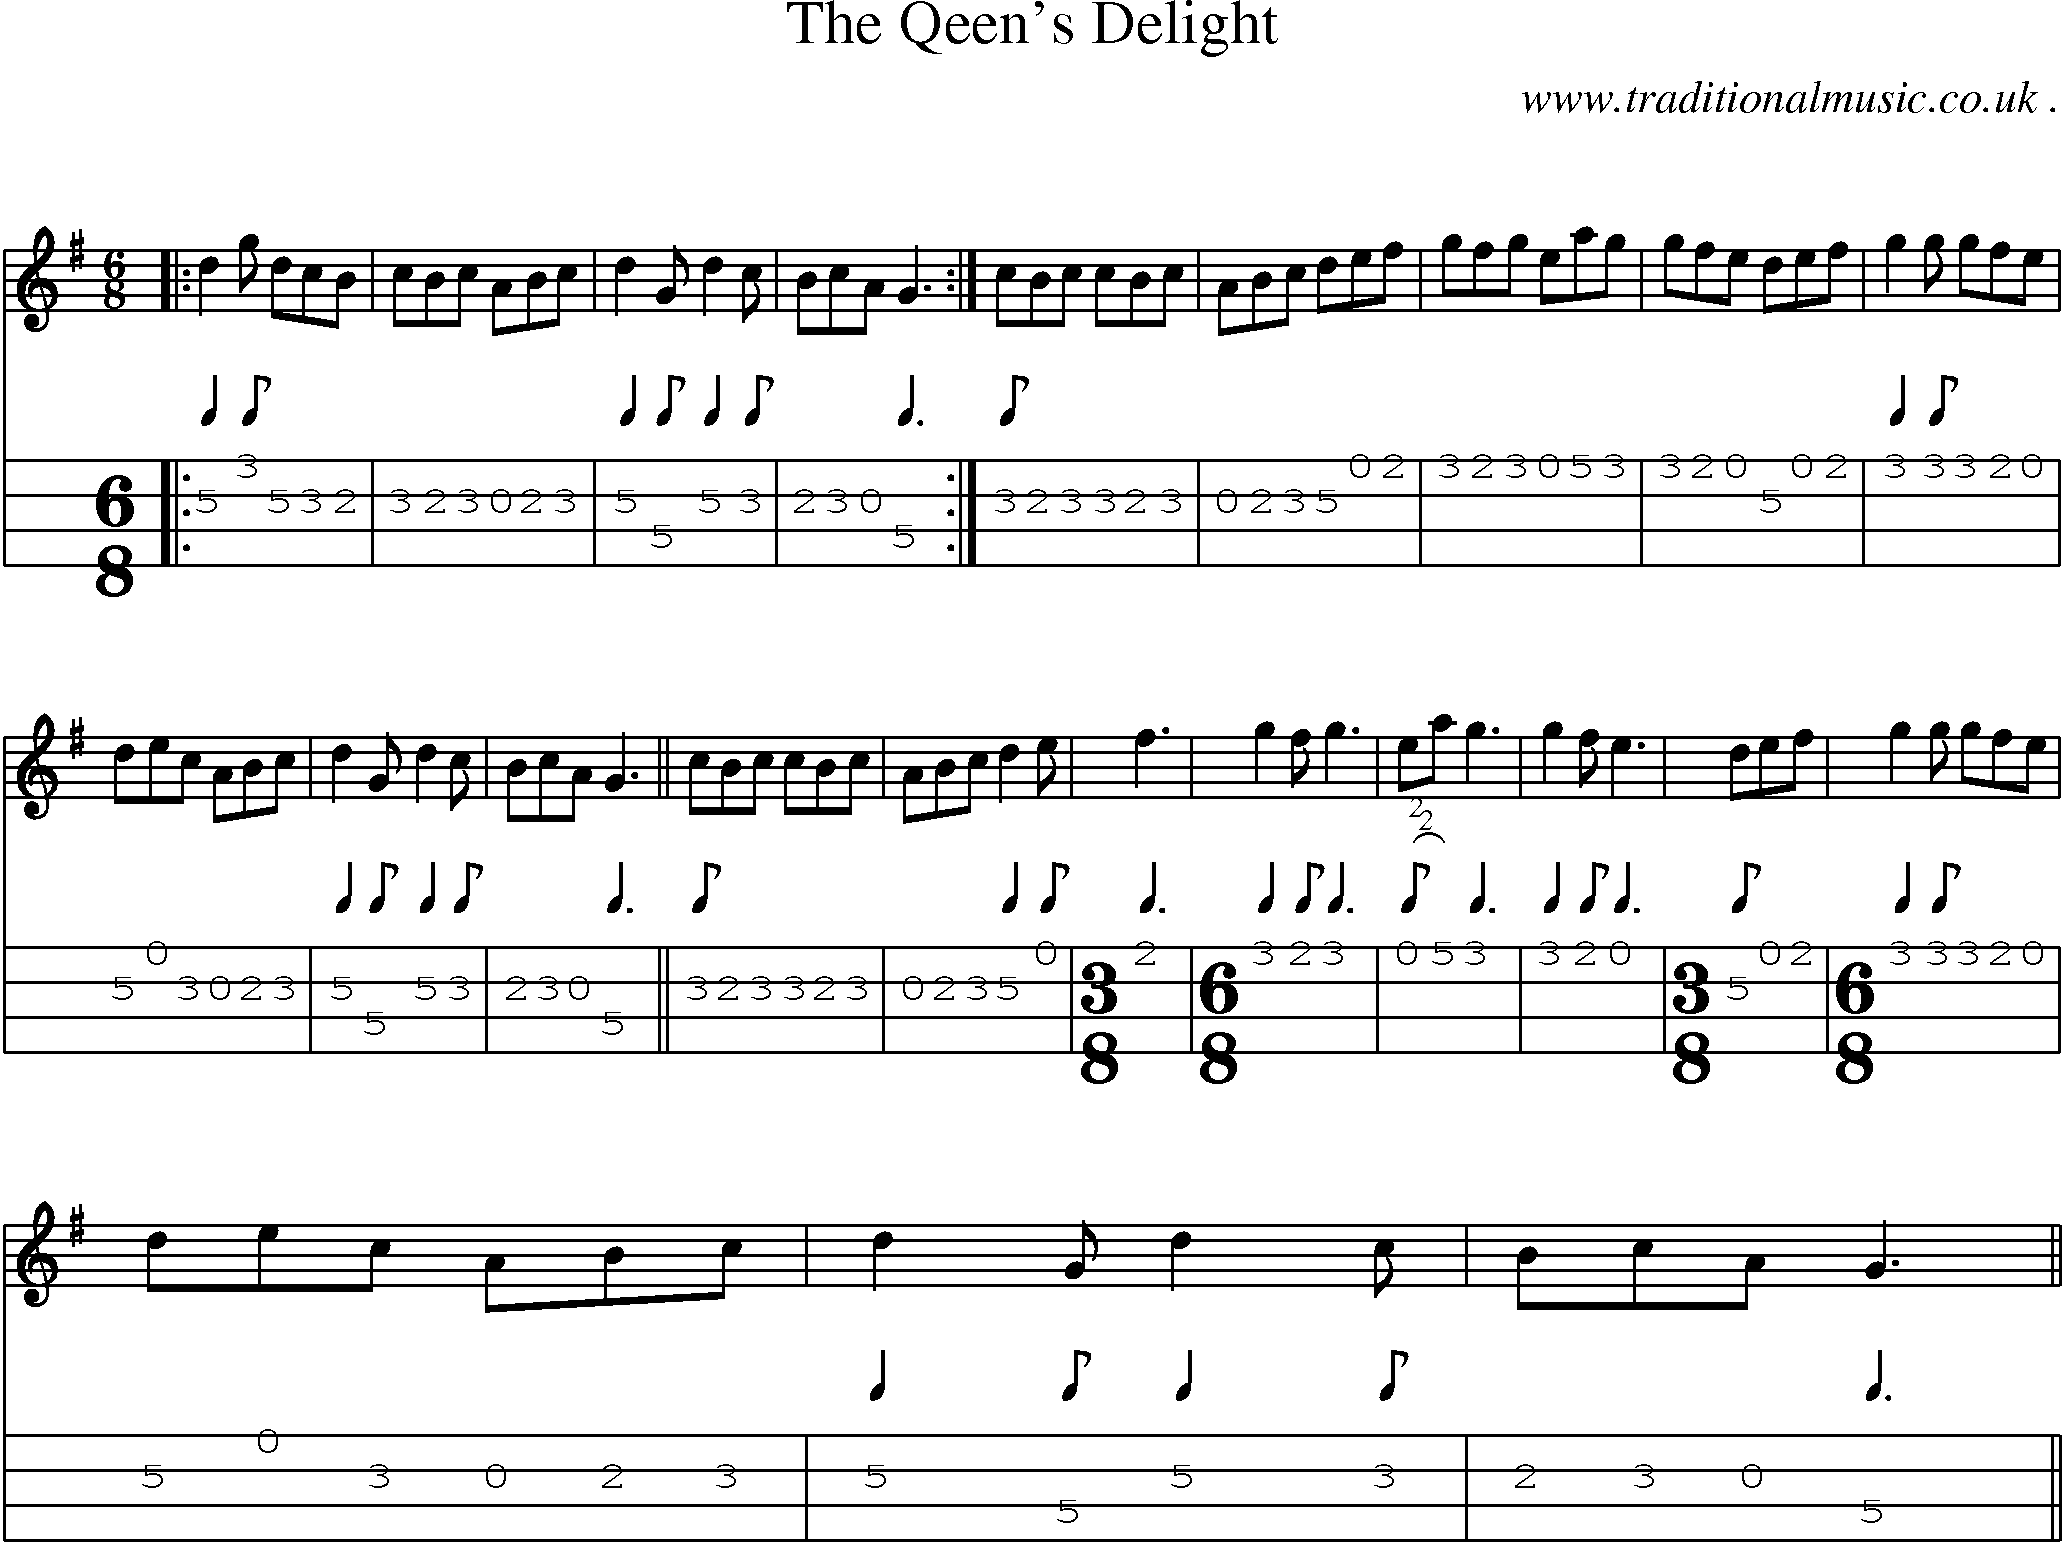 Sheet-Music and Mandolin Tabs for The Qeens Delight